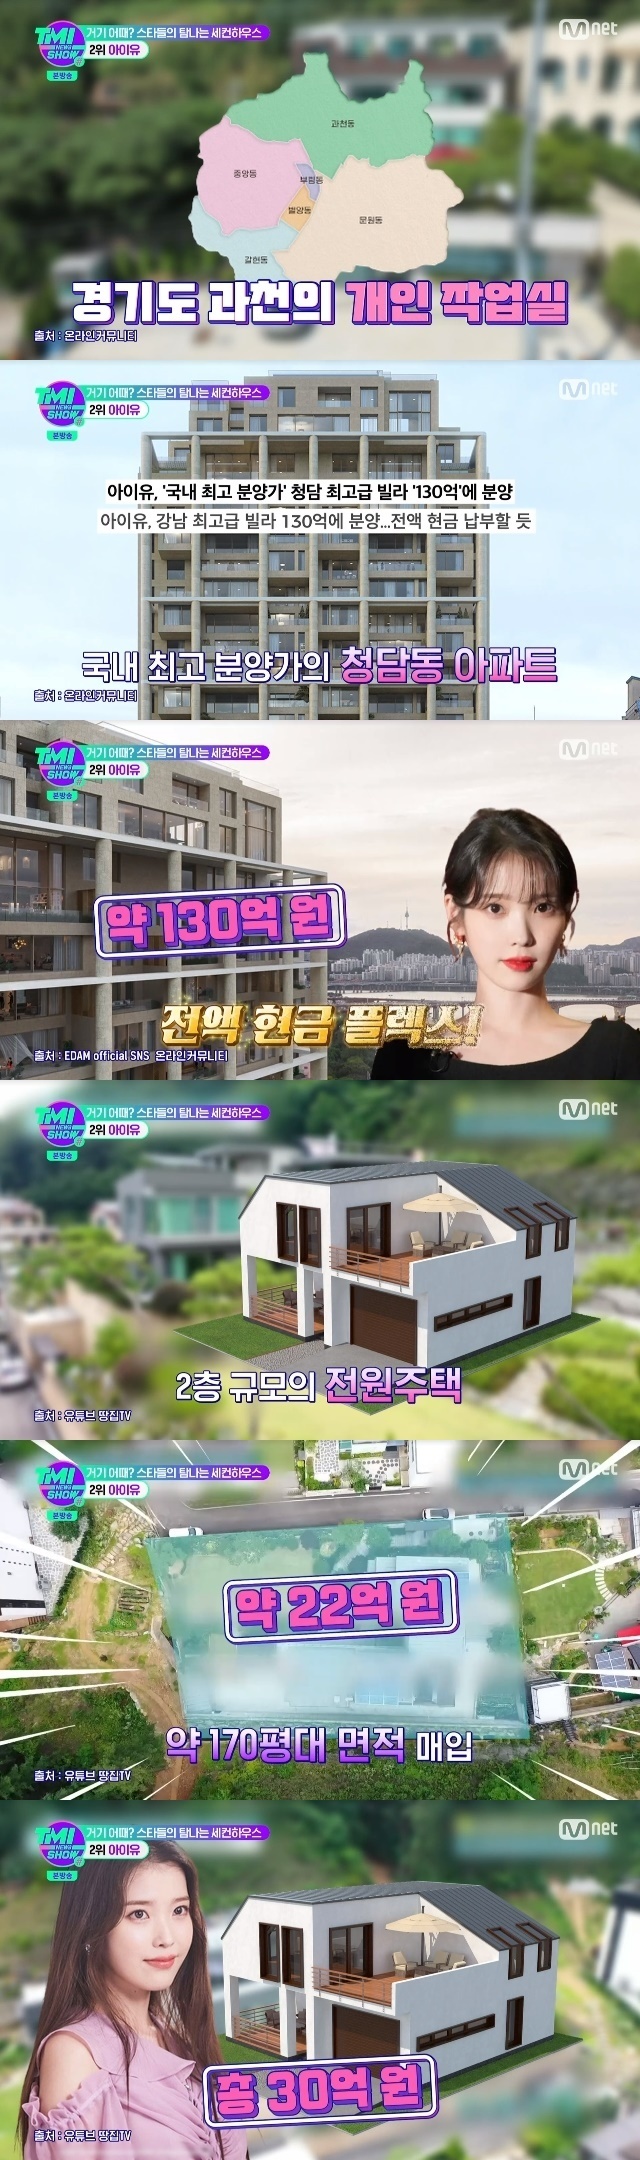 The IUs vast holdings of workplaces and homes have been unveiled.In the 27th Mnet entertainment TMI NEWS SHOW broadcast on August 31, I looked at The coveted Second House BEST 10 of the stars.The second place was the entertainer IU of entertainers who released the actors Lee Jae-wook and Han Hyo-joo.The IU has a private workplace of about 4.6 billion won in Gwacheon, Gyeonggi Province, as well as a marketing about 13 billion won of Cheongdam-dong Partment, which boasts the highest selling price in Korea.The IU also had a second house at Yangpyeong Station, where about 80 celebrities still live in the area, which was famous for Lee Young-aes residence.Yangpyeong station was especially popular with entertainers because of its good accessibility with Seoul.In the case of IU, it is known that Yangpyeong station was chosen for the rest of the family including the grandmother.The second house in the IU is a two-story former One house with an area of about 170 square meters; the IU purchased it for about 2.2 billion One.It is reported that the surrounding land was also purchased and 800 million One was added. The total cost of the second house is 3 billion One.